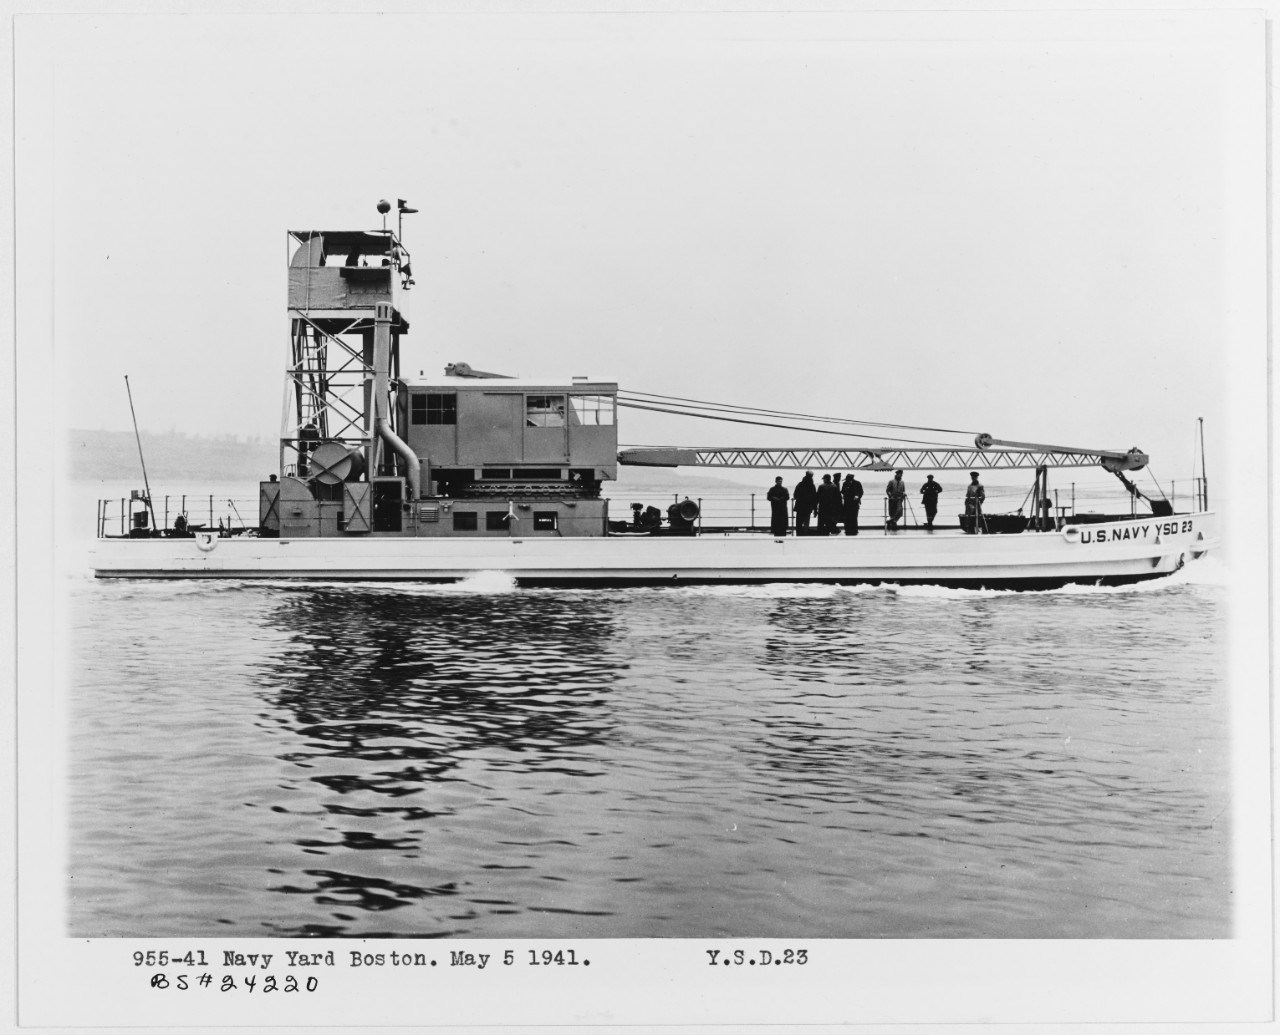 A utilitarian service craft, YSD-23, is a seaplane wrecking derrick, floating on the water.